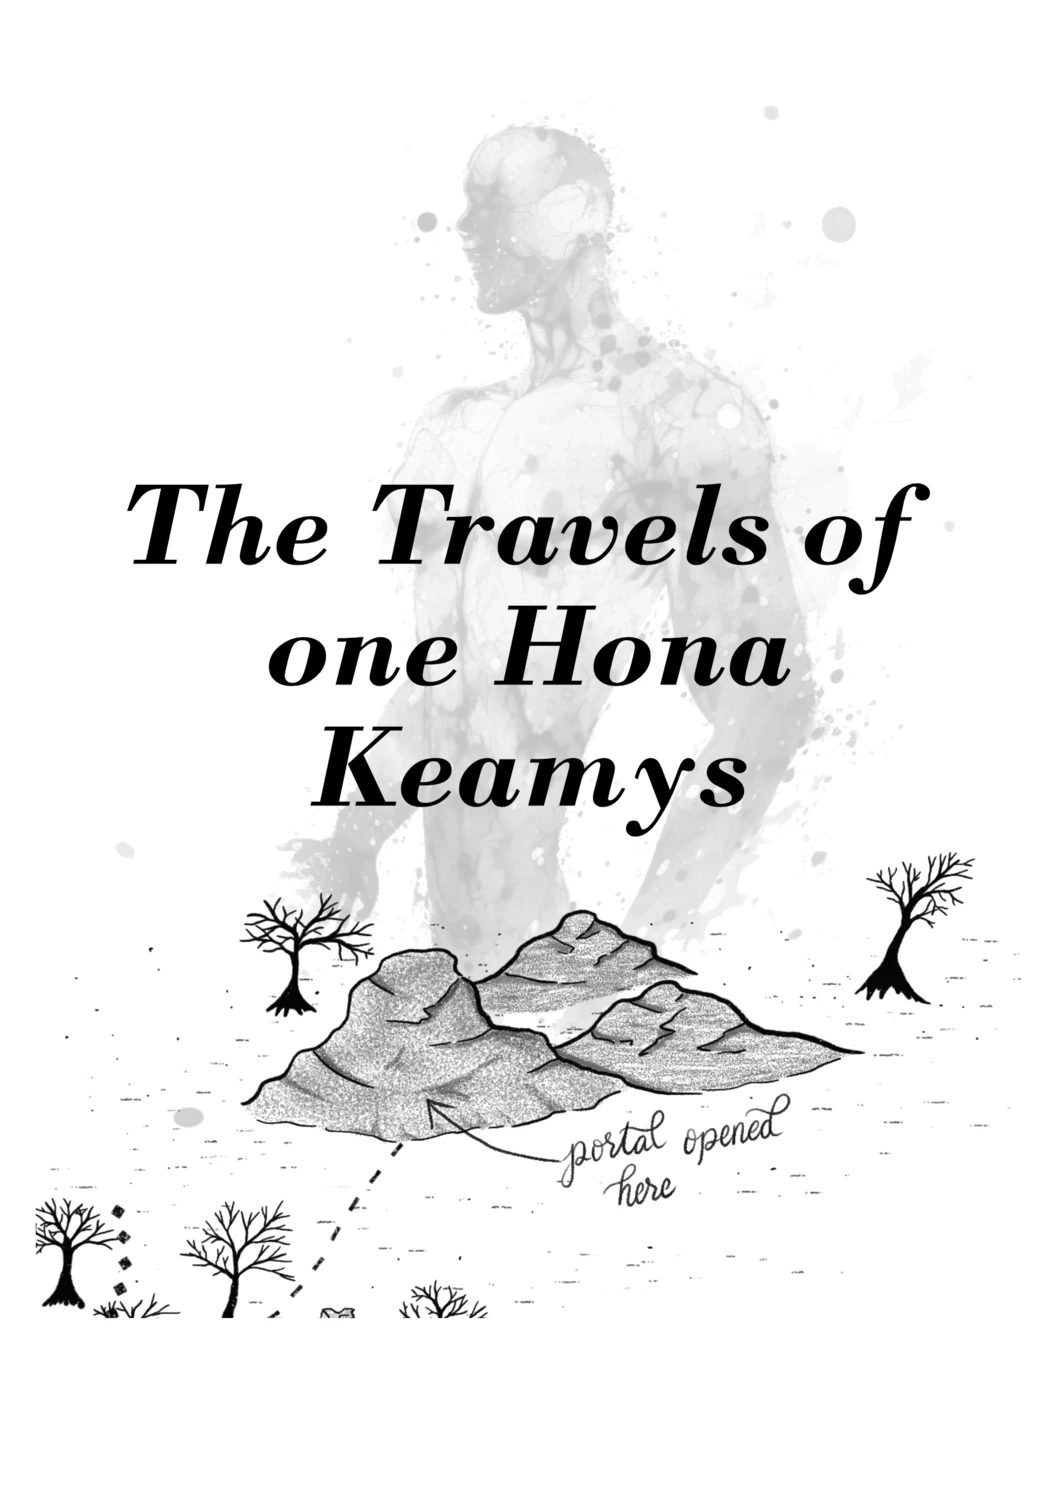 The Travels of Hona Keamys vol 1. - Physical copy